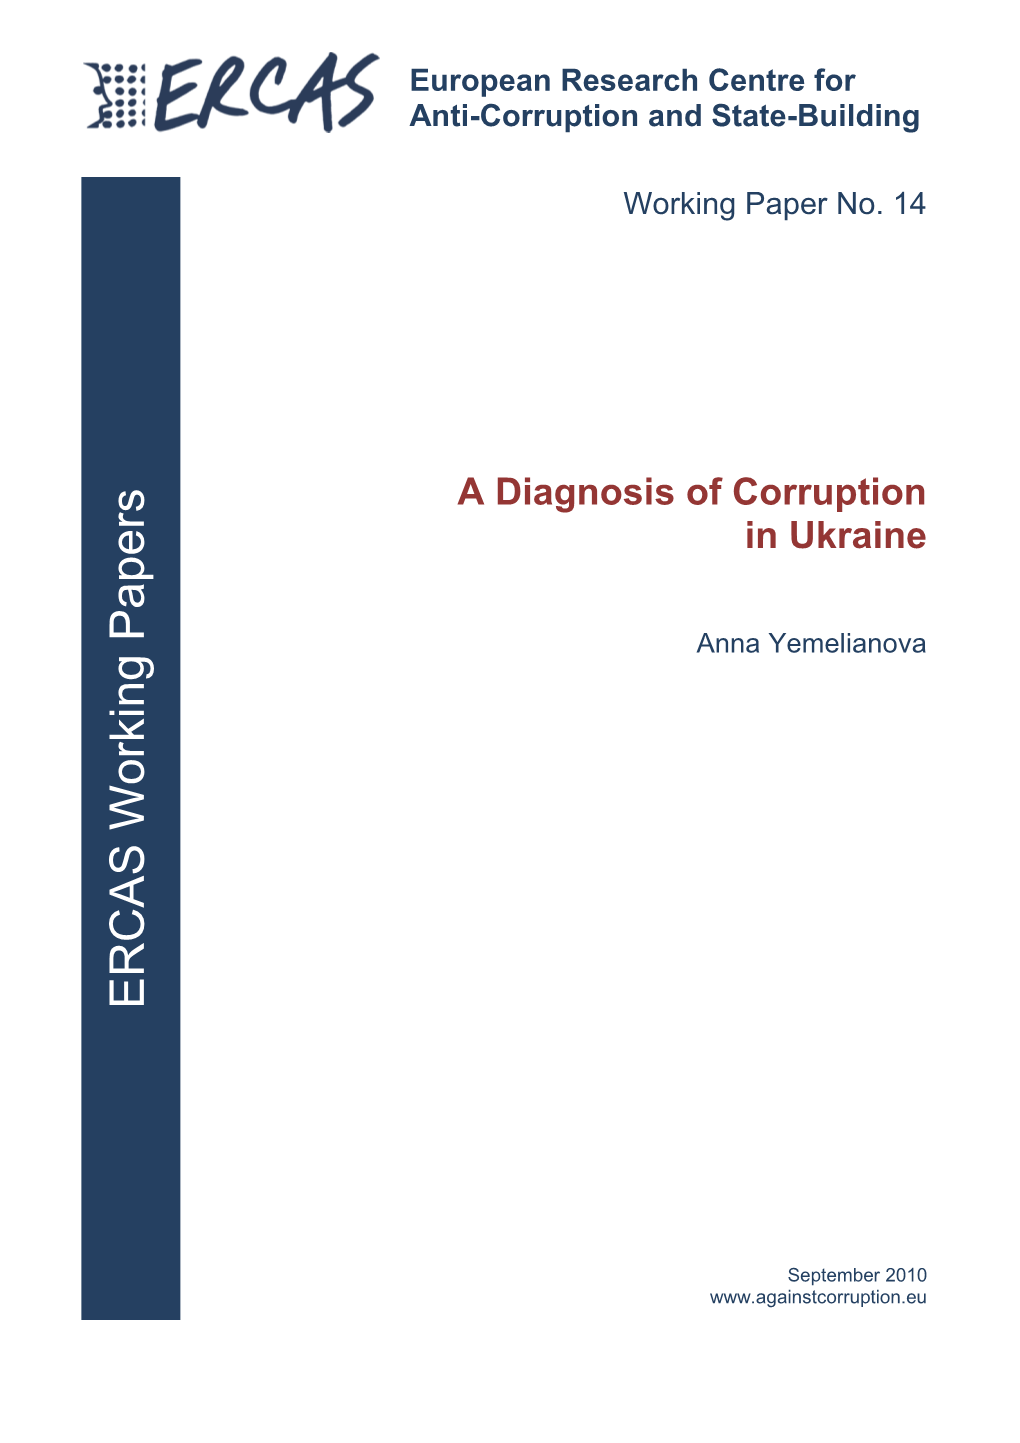 Working Paper No. 14, a Diagnosis of Corruption in Ukraine